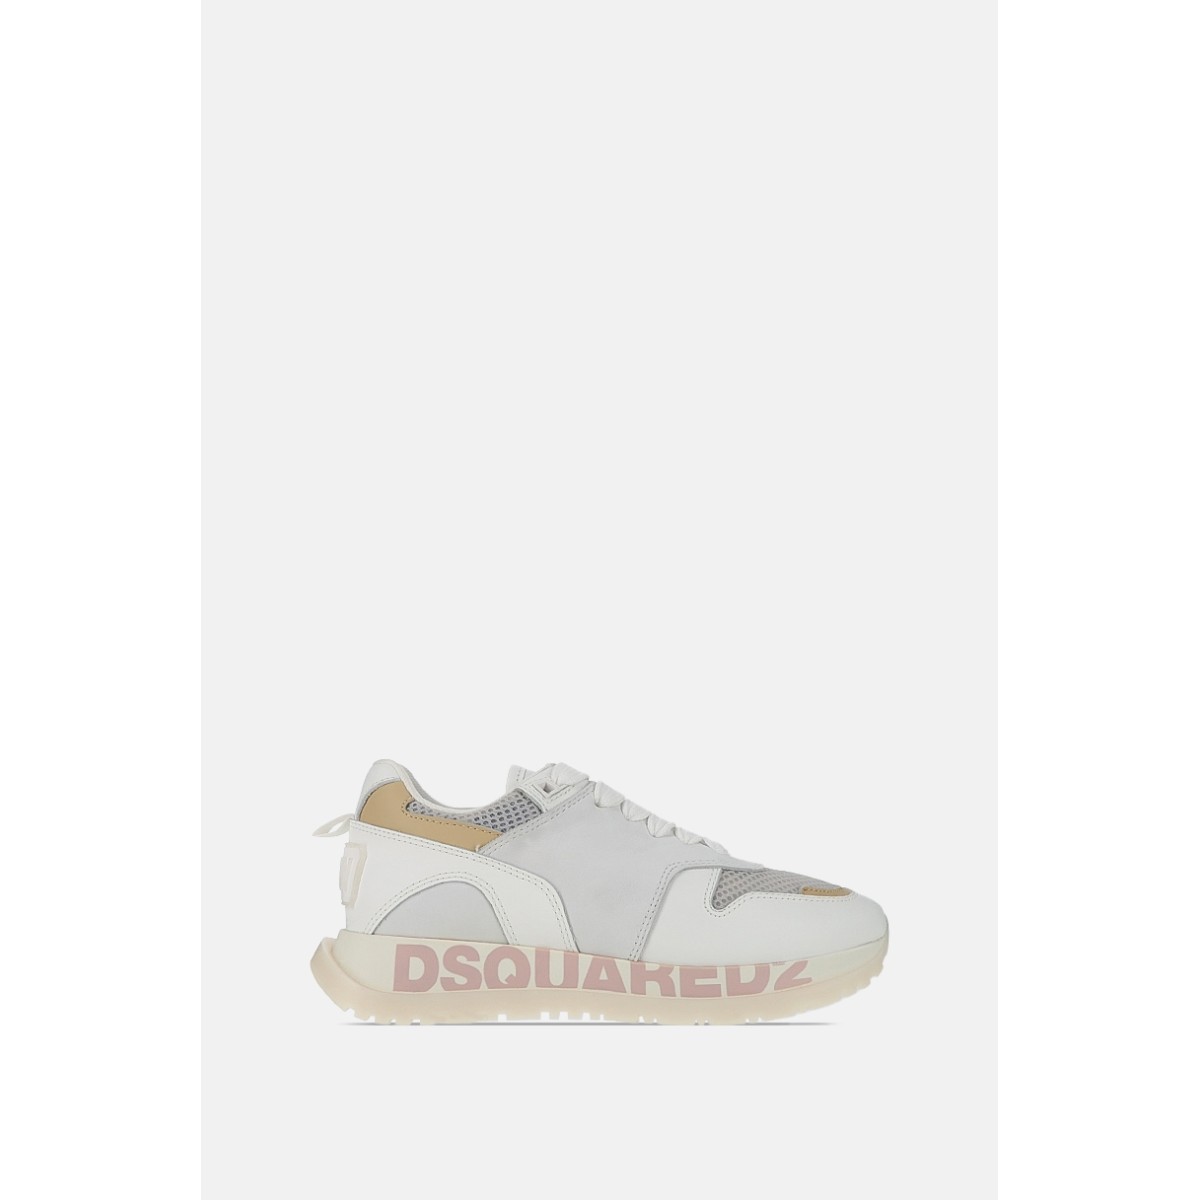 Baskets Running Dsquared2